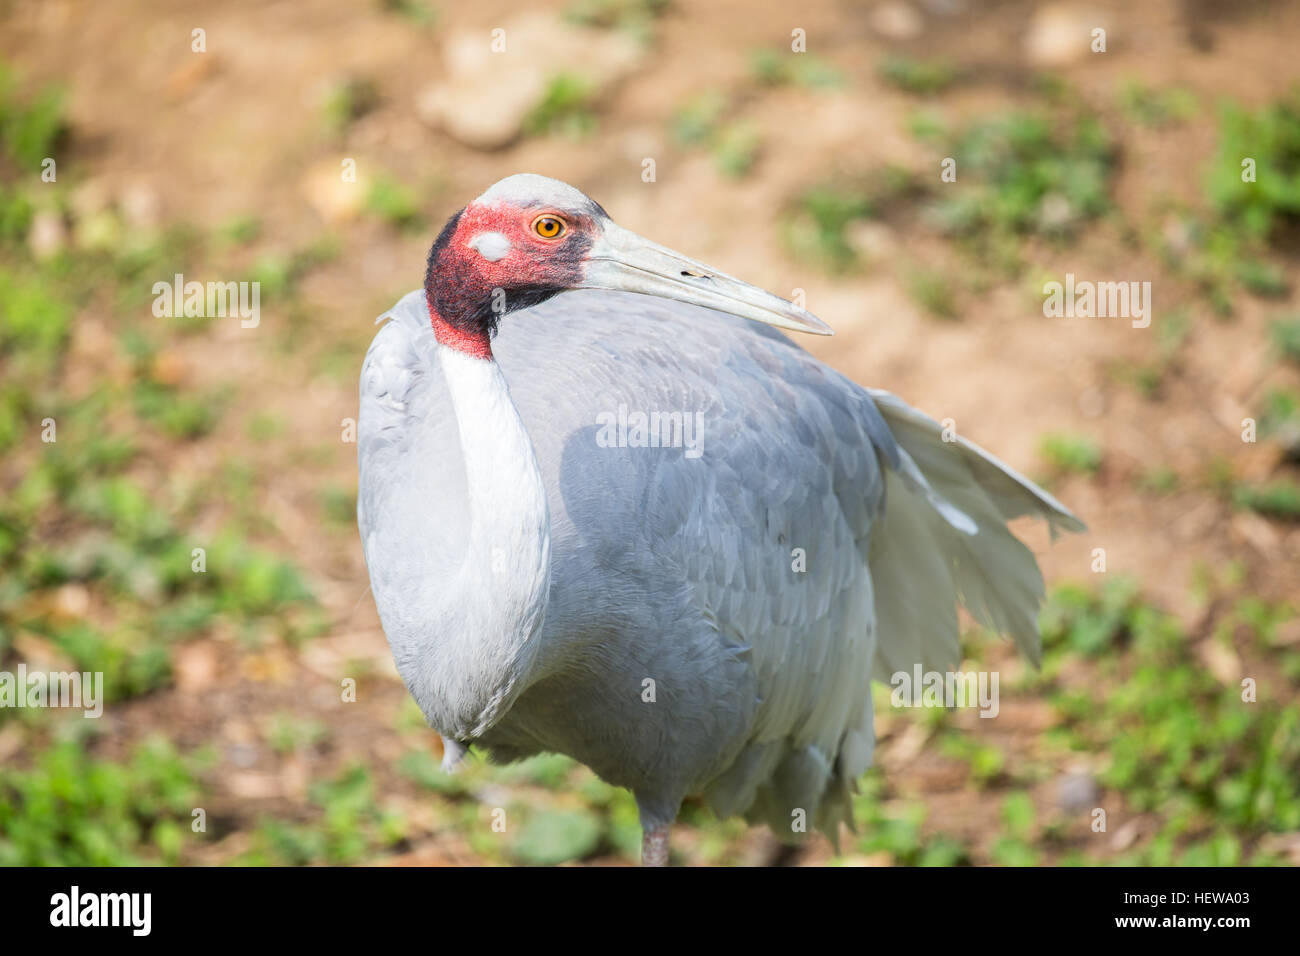 A sarus crane, Grus antigone, a large bird found in the Indian Subcontinent, Southeast Asia and Australia. The bare red skin of the adult's head and n Stock Photo